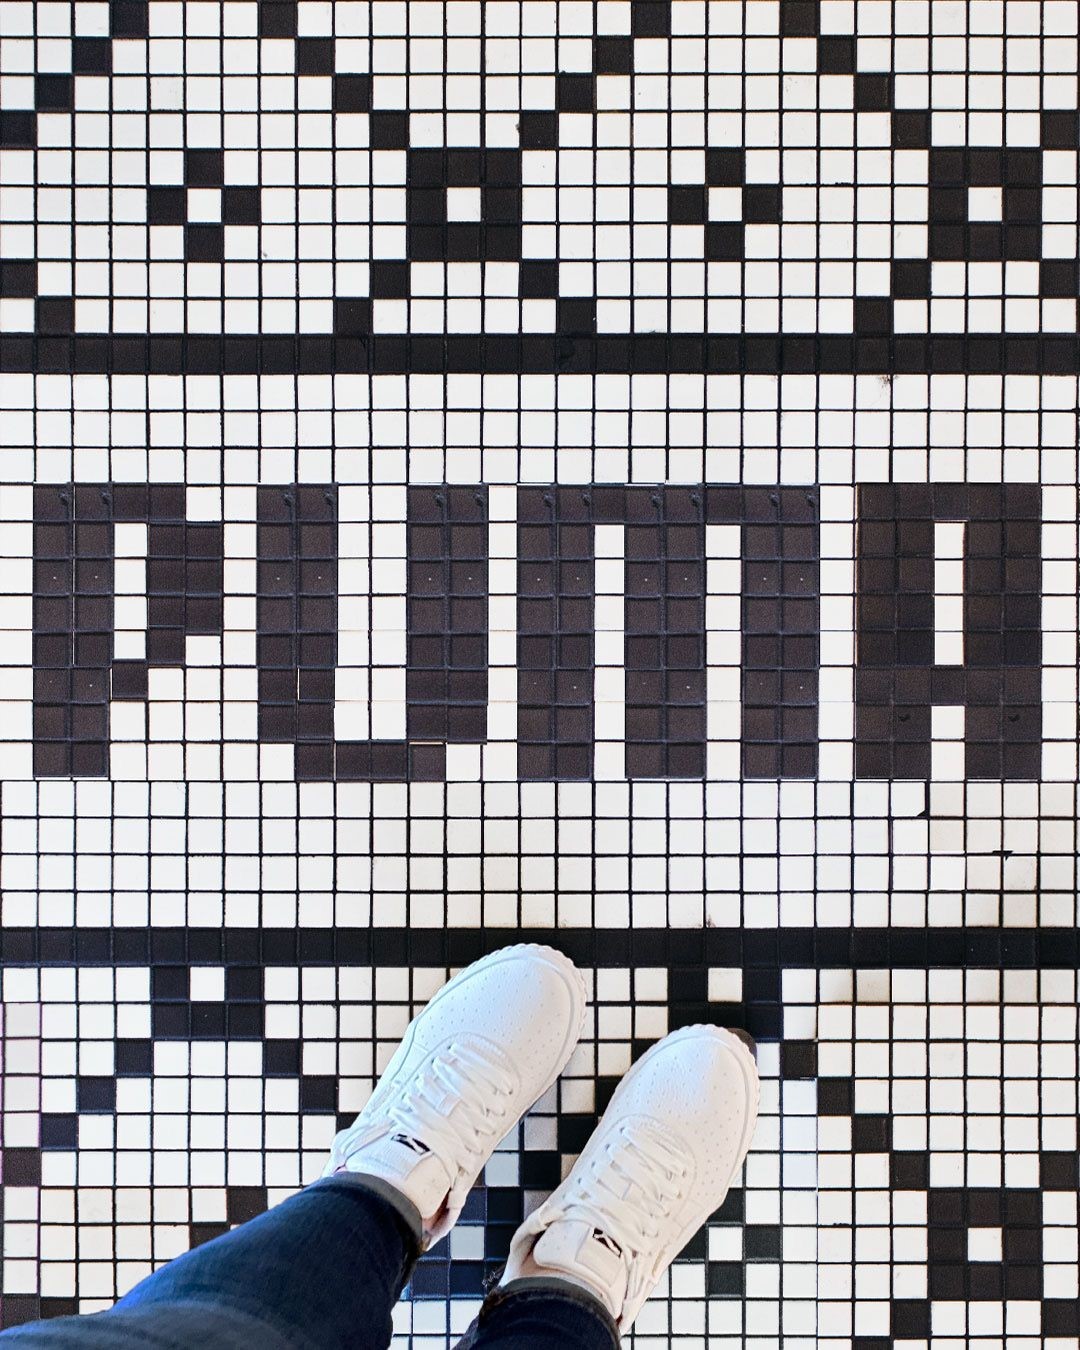 PUMA - Tag @ihavethisthingwithfloors in the comments so they see it and repost 😂